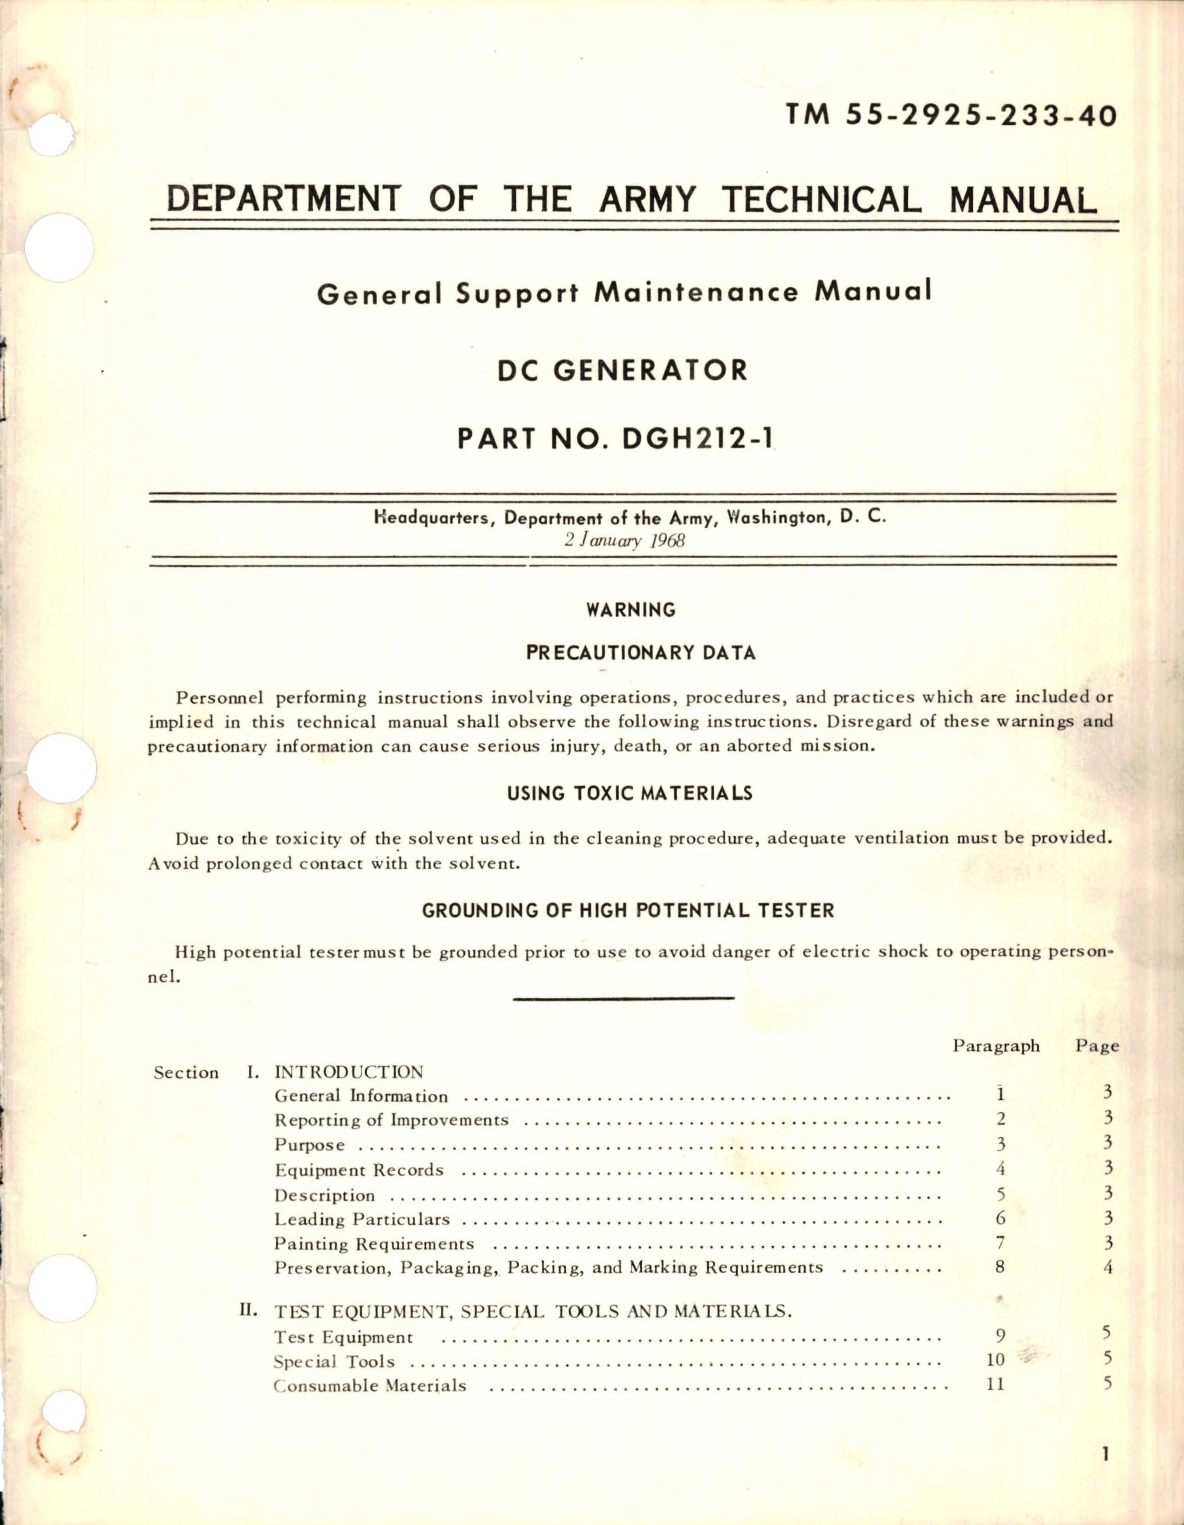 Sample page 1 from AirCorps Library document: Maintenance Manual for DC Generator - Part DGH212-1